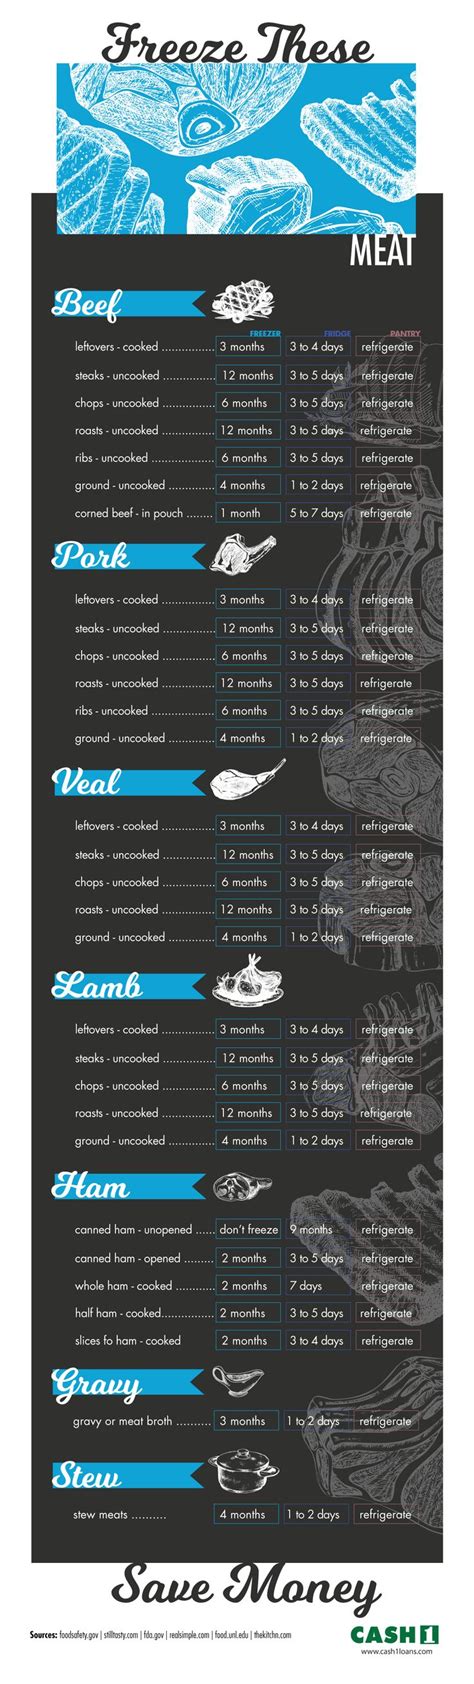 How long can beef stew be left at room temperature? Pin on Fun Infographics